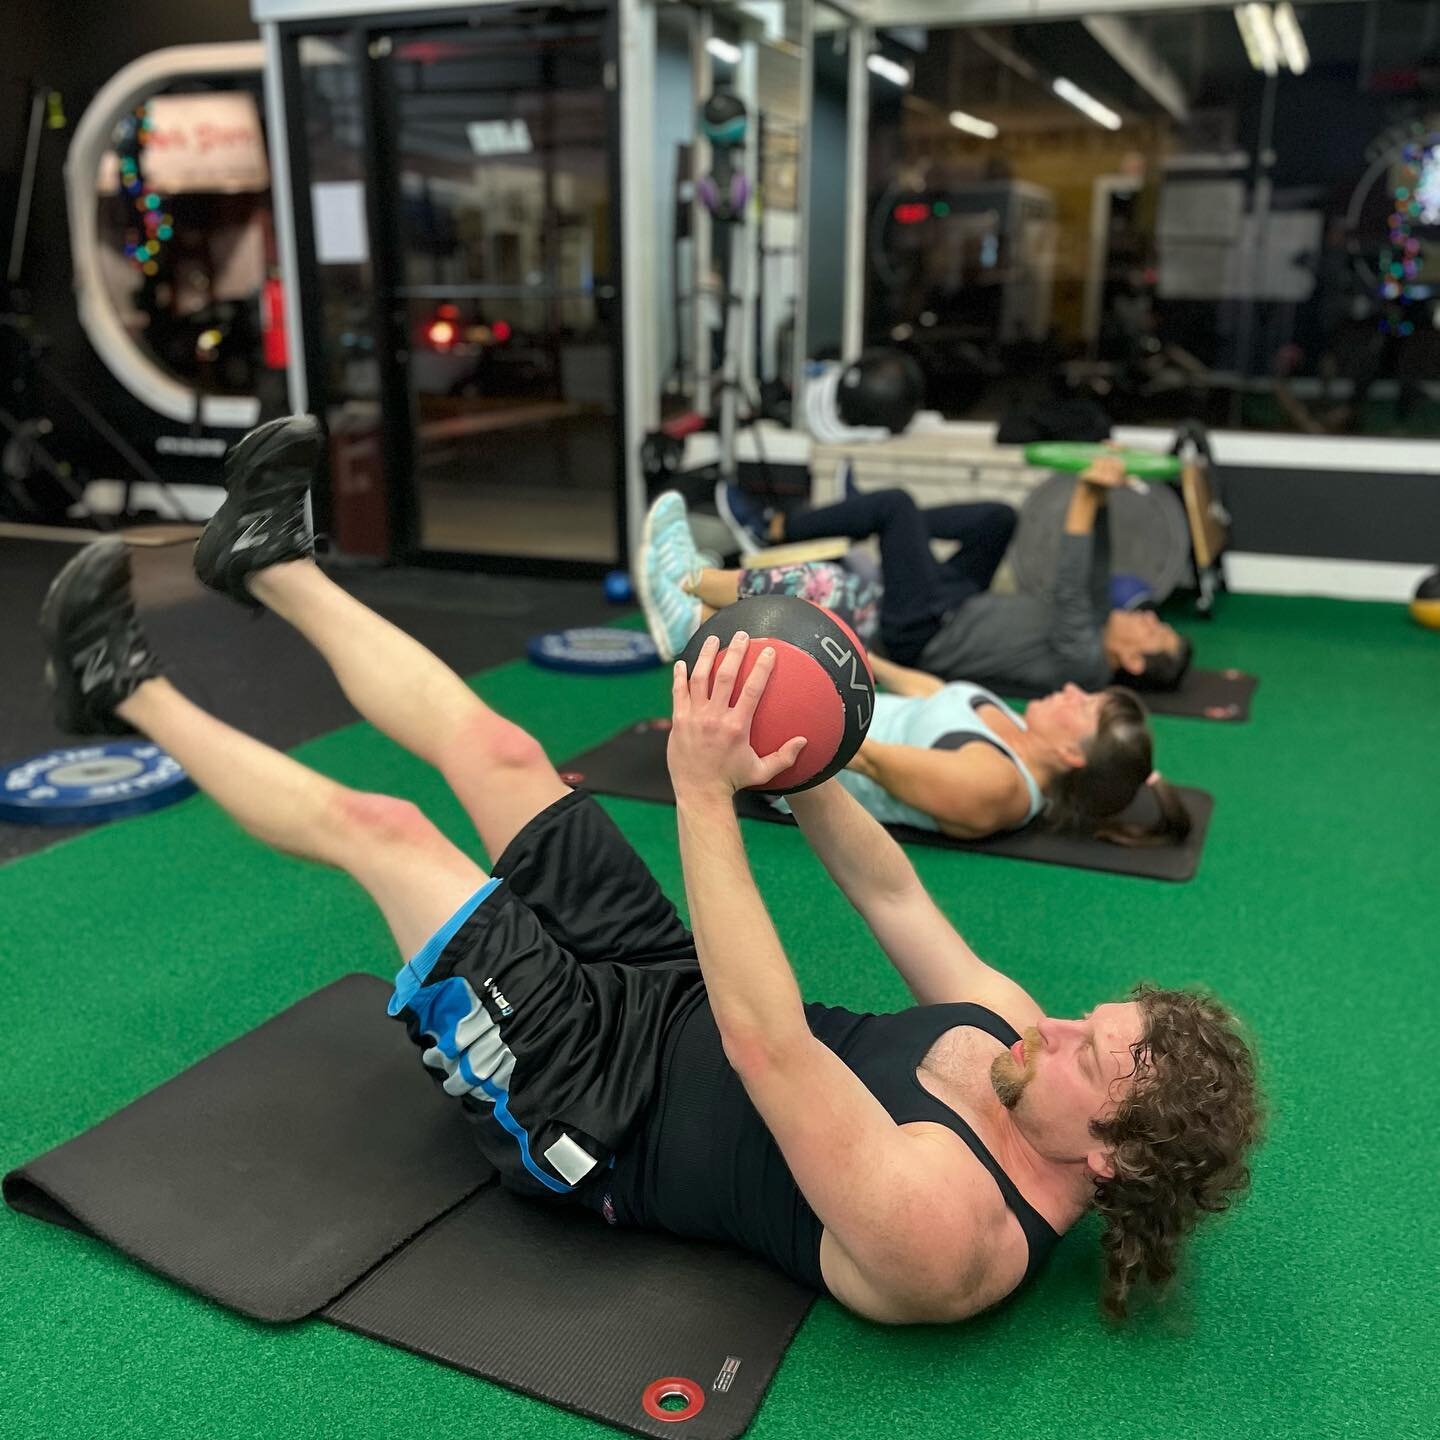 Public total body strength and cardio classes for all levels Mondays and Wednesdays 6PM. 💪
.
.
.
.
.
#fitness #exercise #training #cardio #abs #nasm #personaltrainer #workout #grouptraining #fitfam #core #strength #motivation